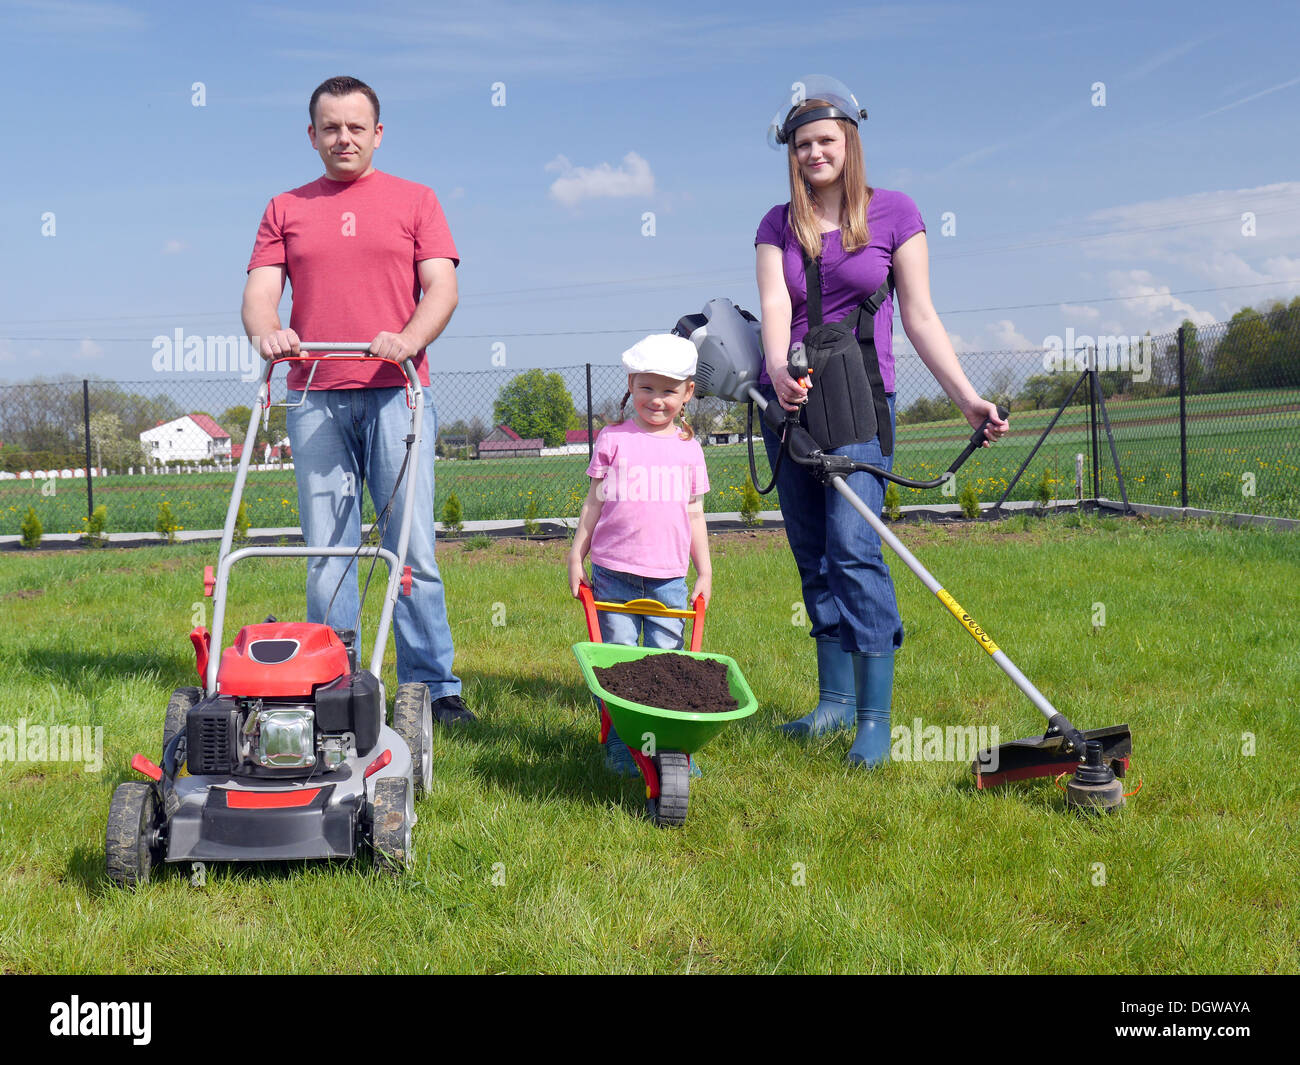 Dad standing with power mower, mom holding strimmer and their cute kid posing with green barrow full of soil Stock Photo